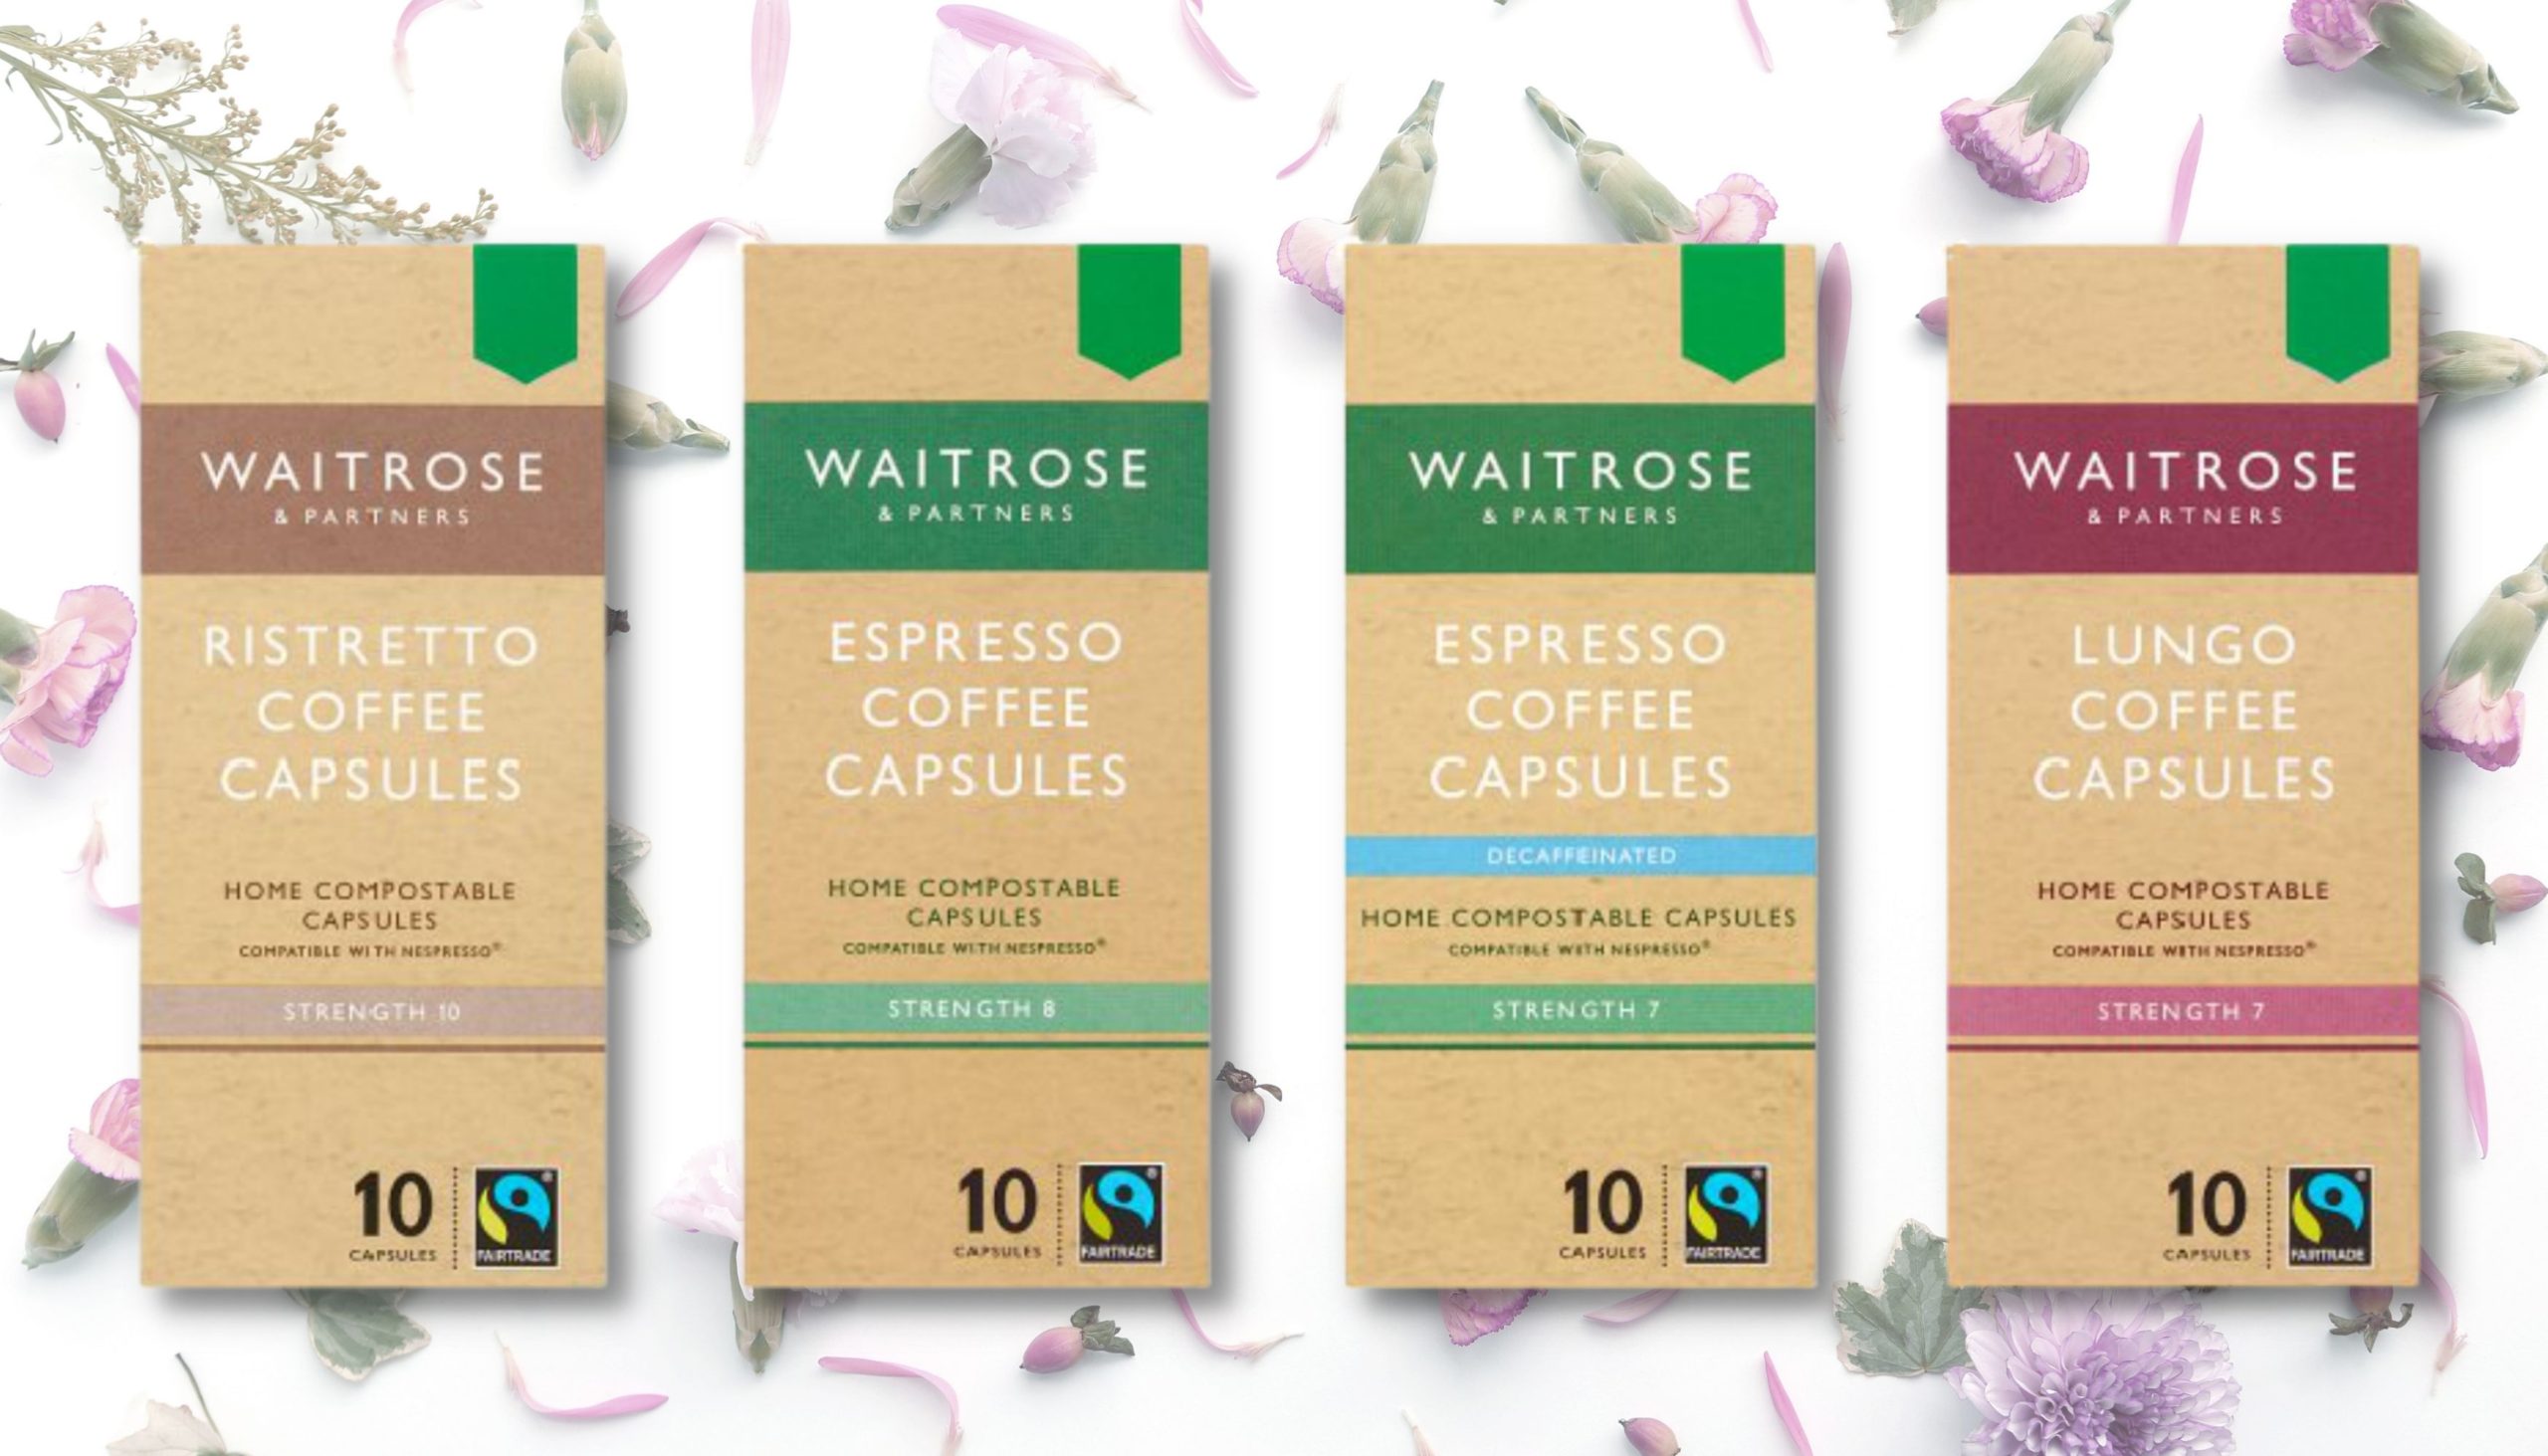 Waitrose Compostable Coffee Pods: The first supermarket to introduce home compostable coffee capsules